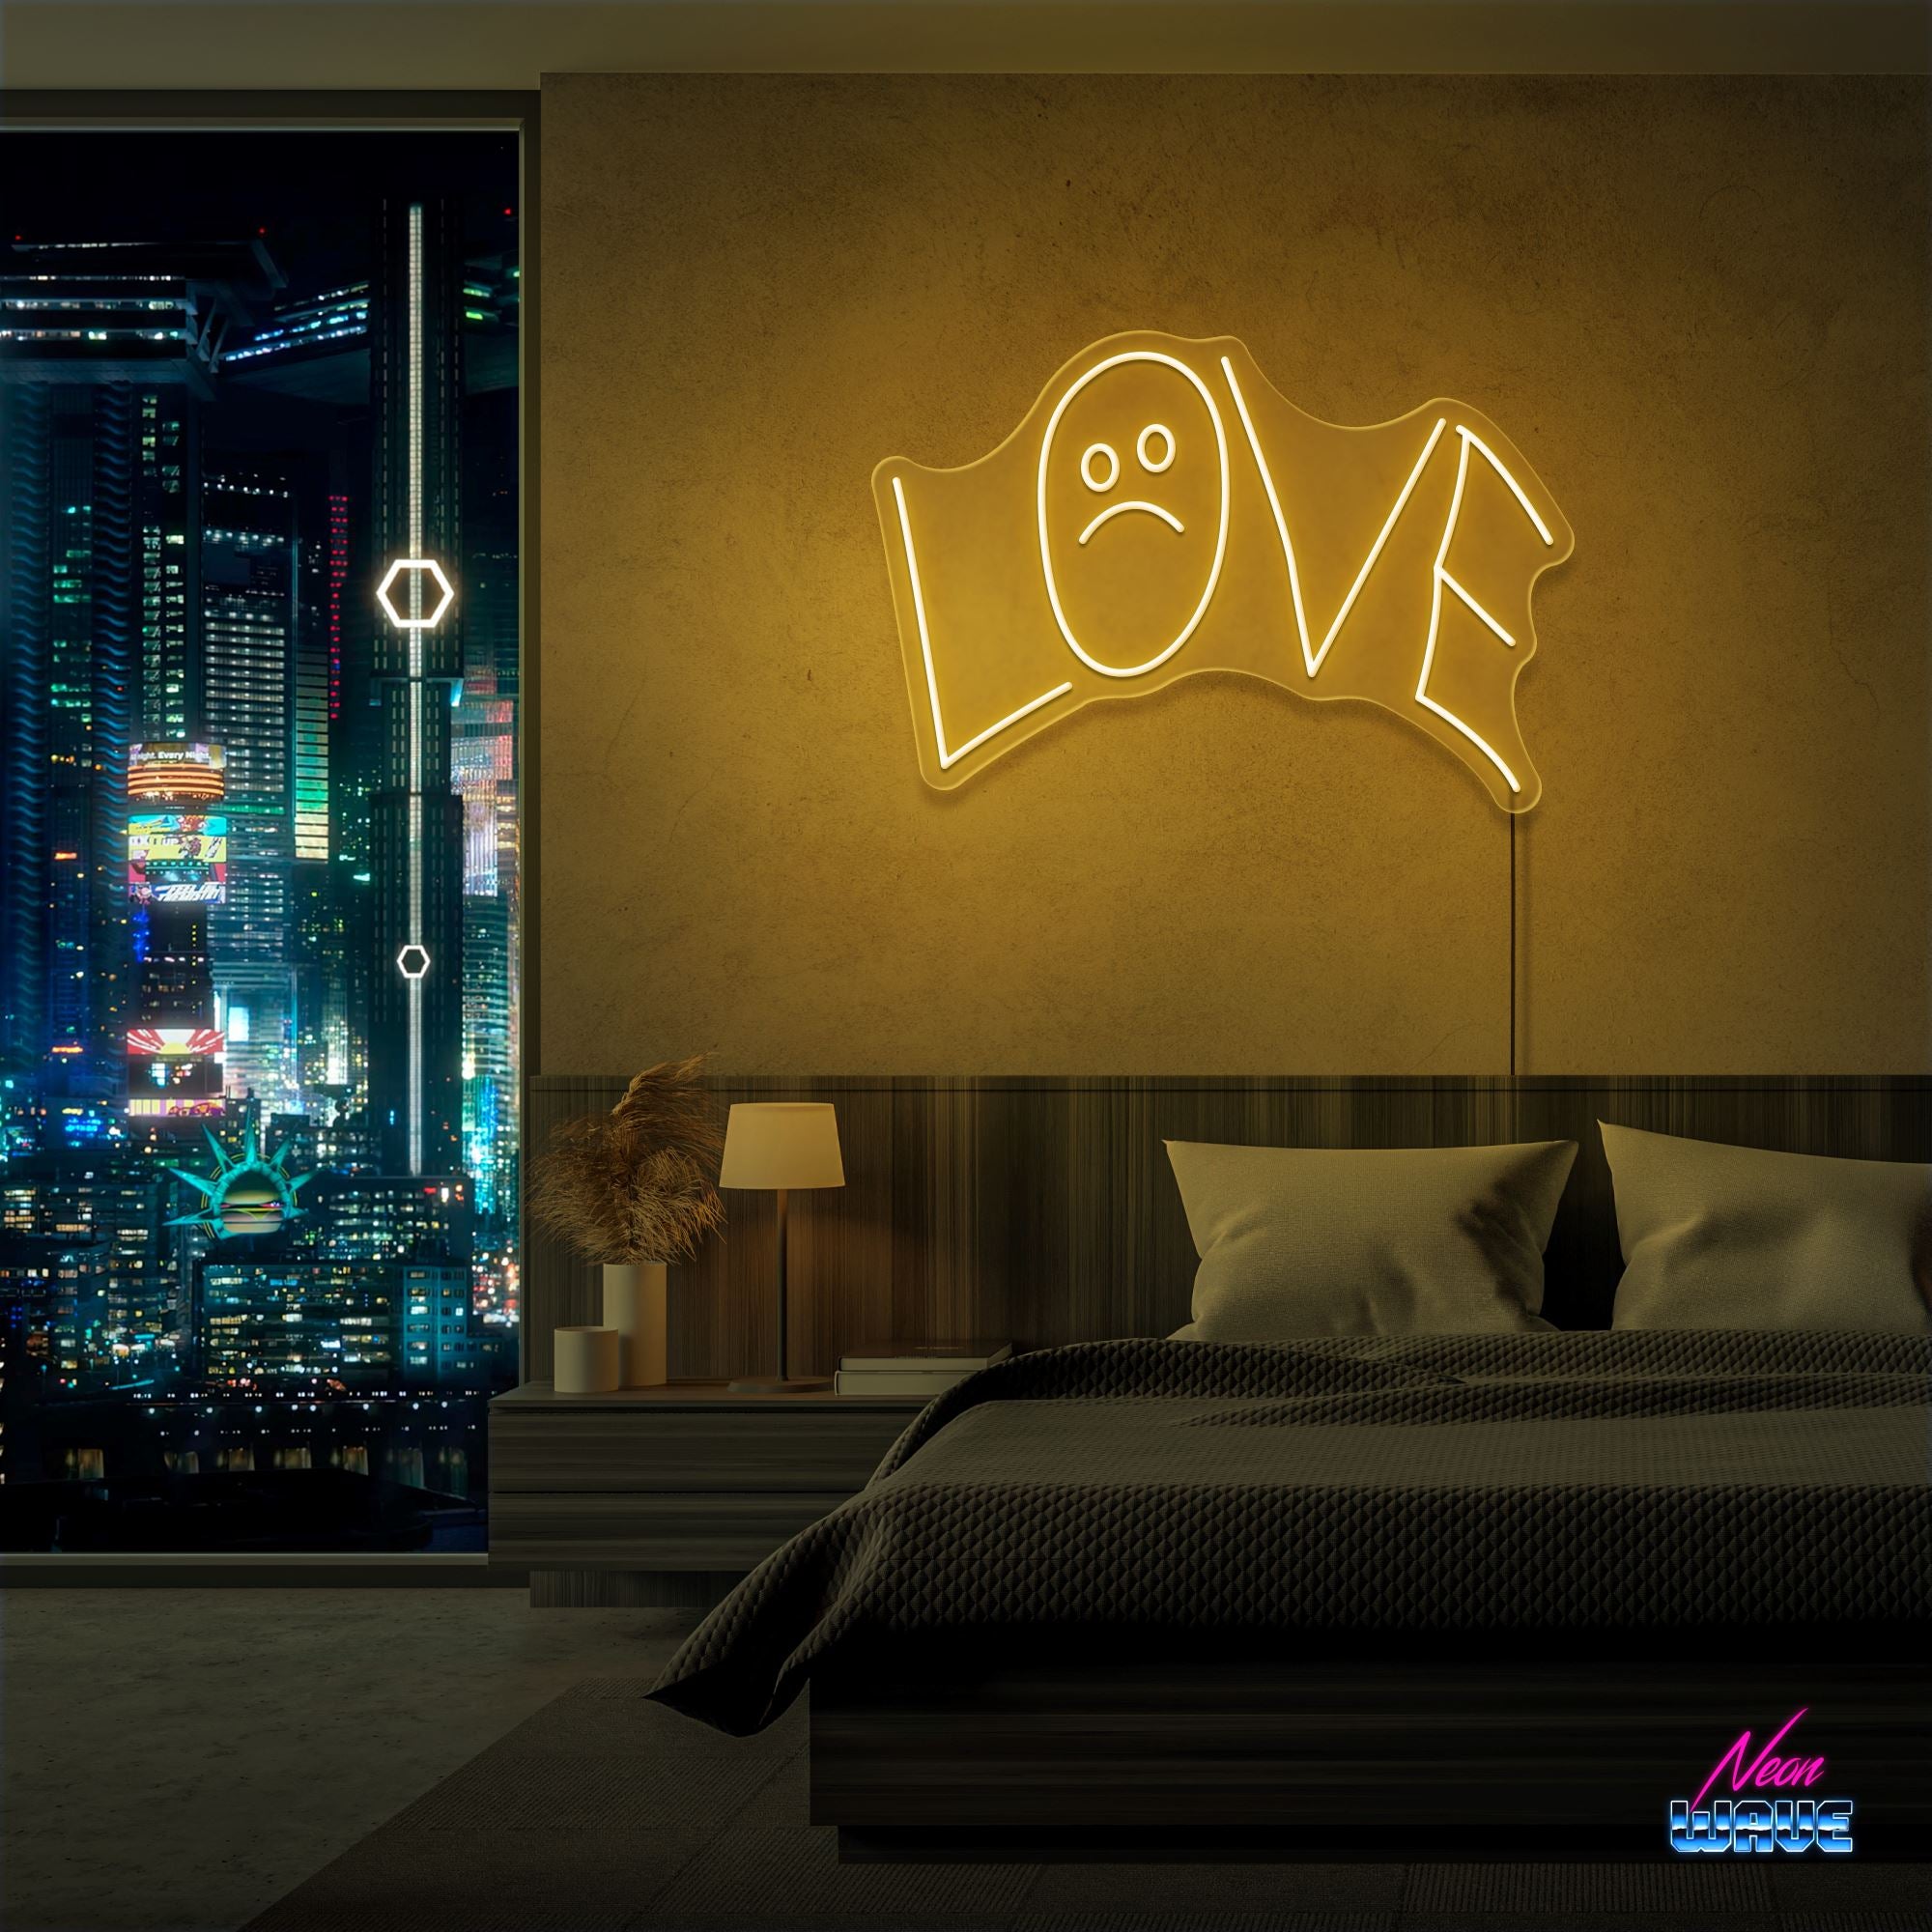 LOVE :( by "Lil Peep" Neon Sign Neonwave.ch 50cm Gold 